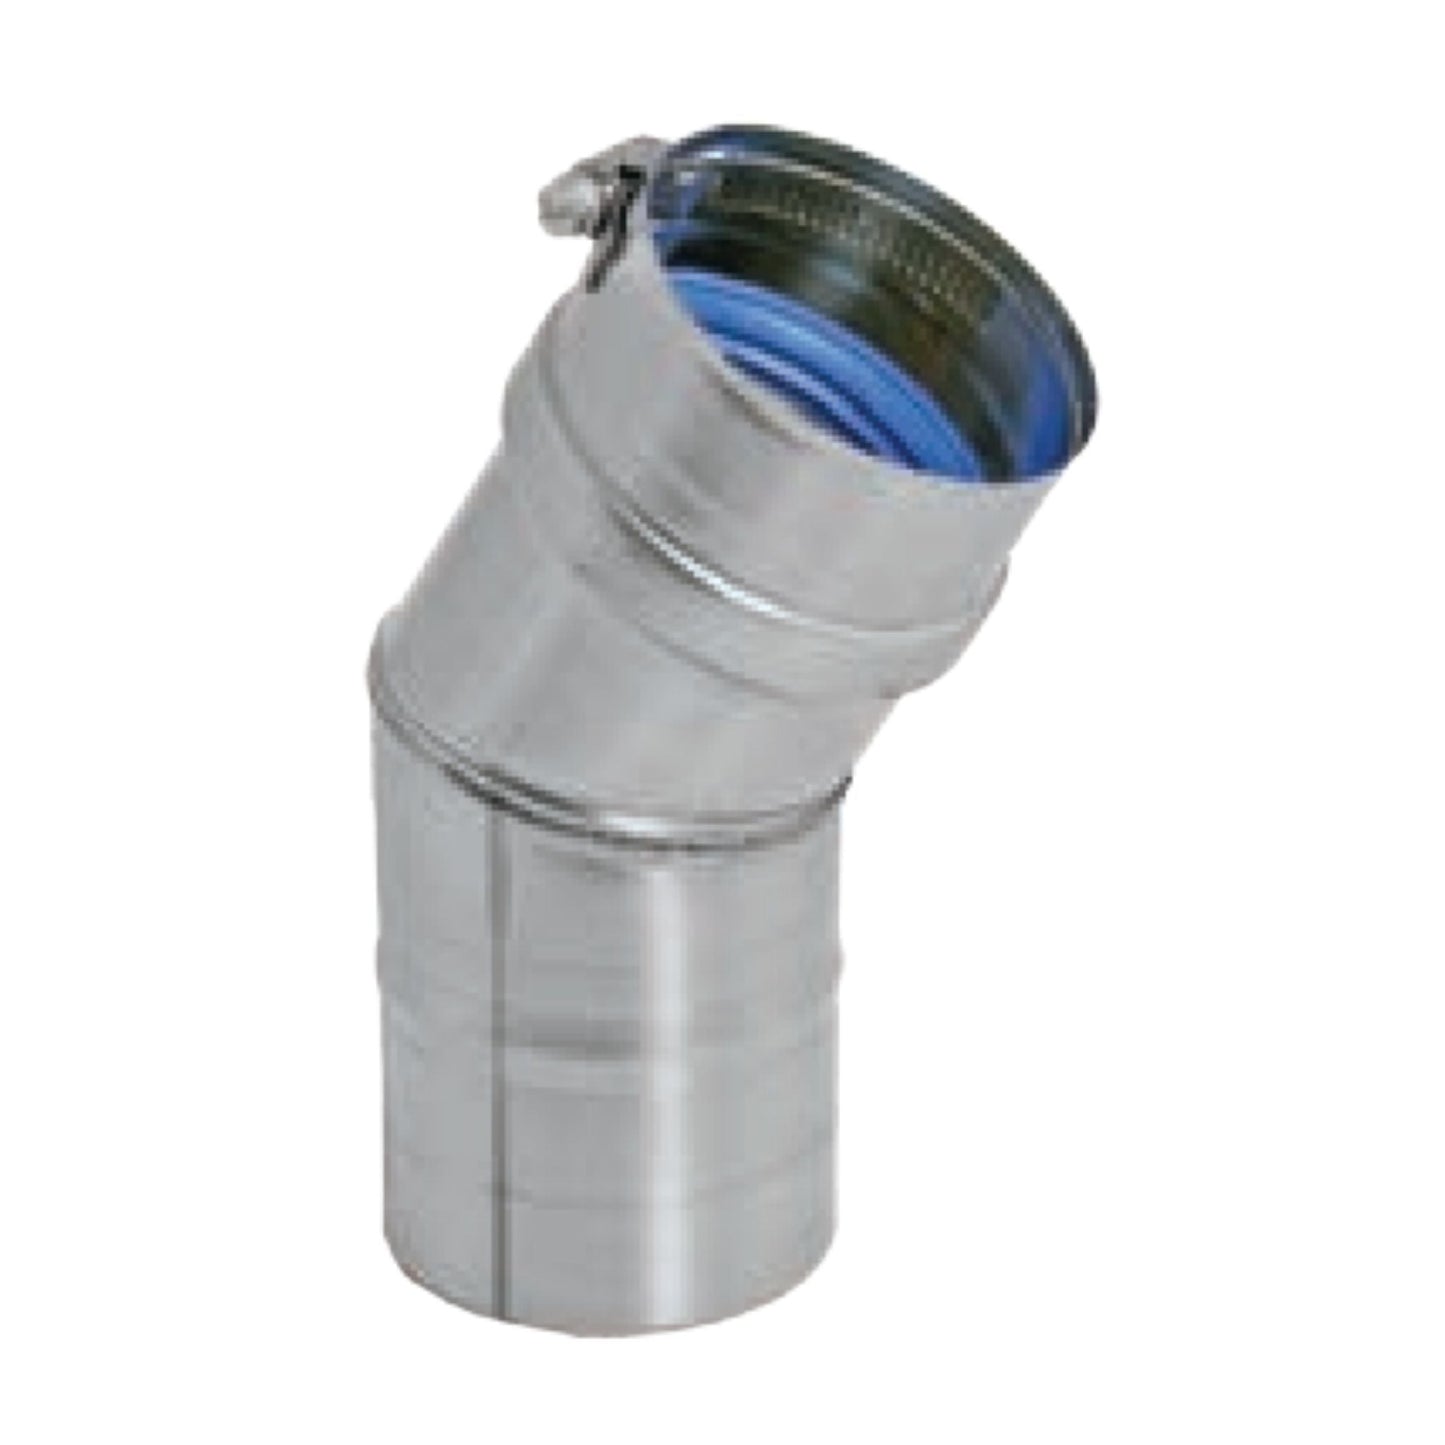 DuraVent FasNSeal 8" 30 Degree 29-4C Stainless Steel Elbow